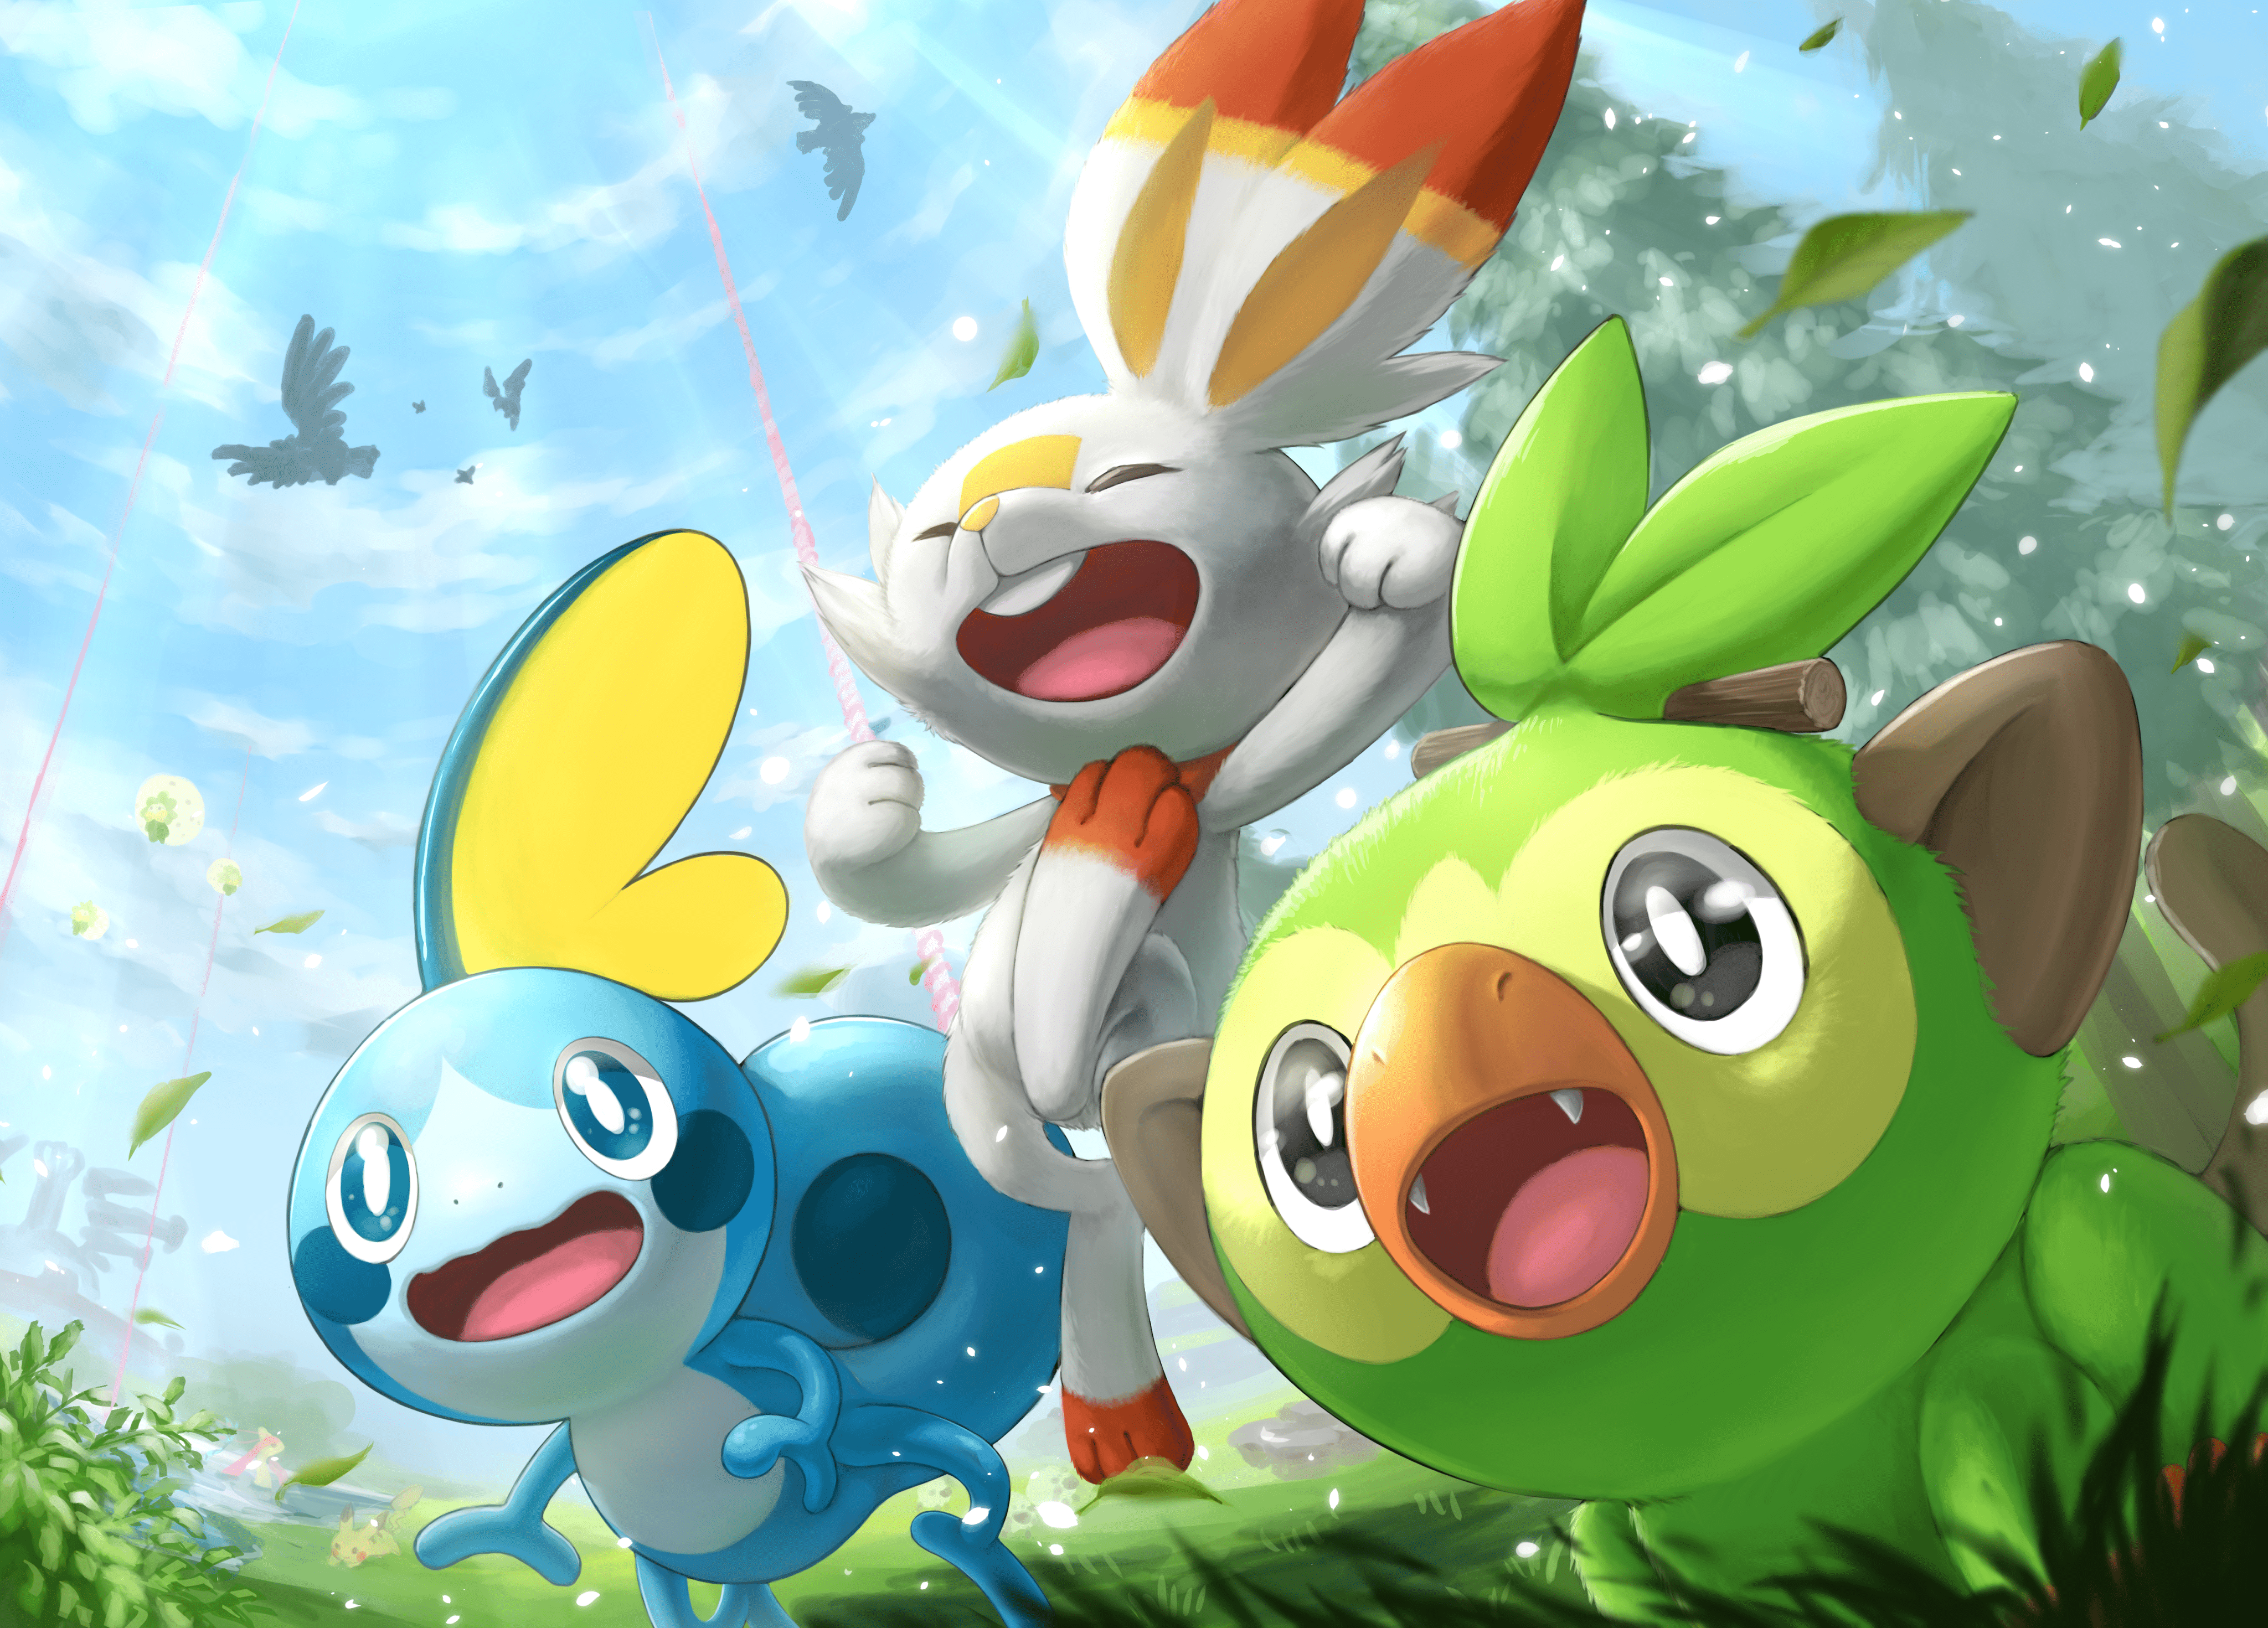 Download This Free Pokemon Sword And Shield Wallpaper Featuring The Galar  Starters – NintendoSoup